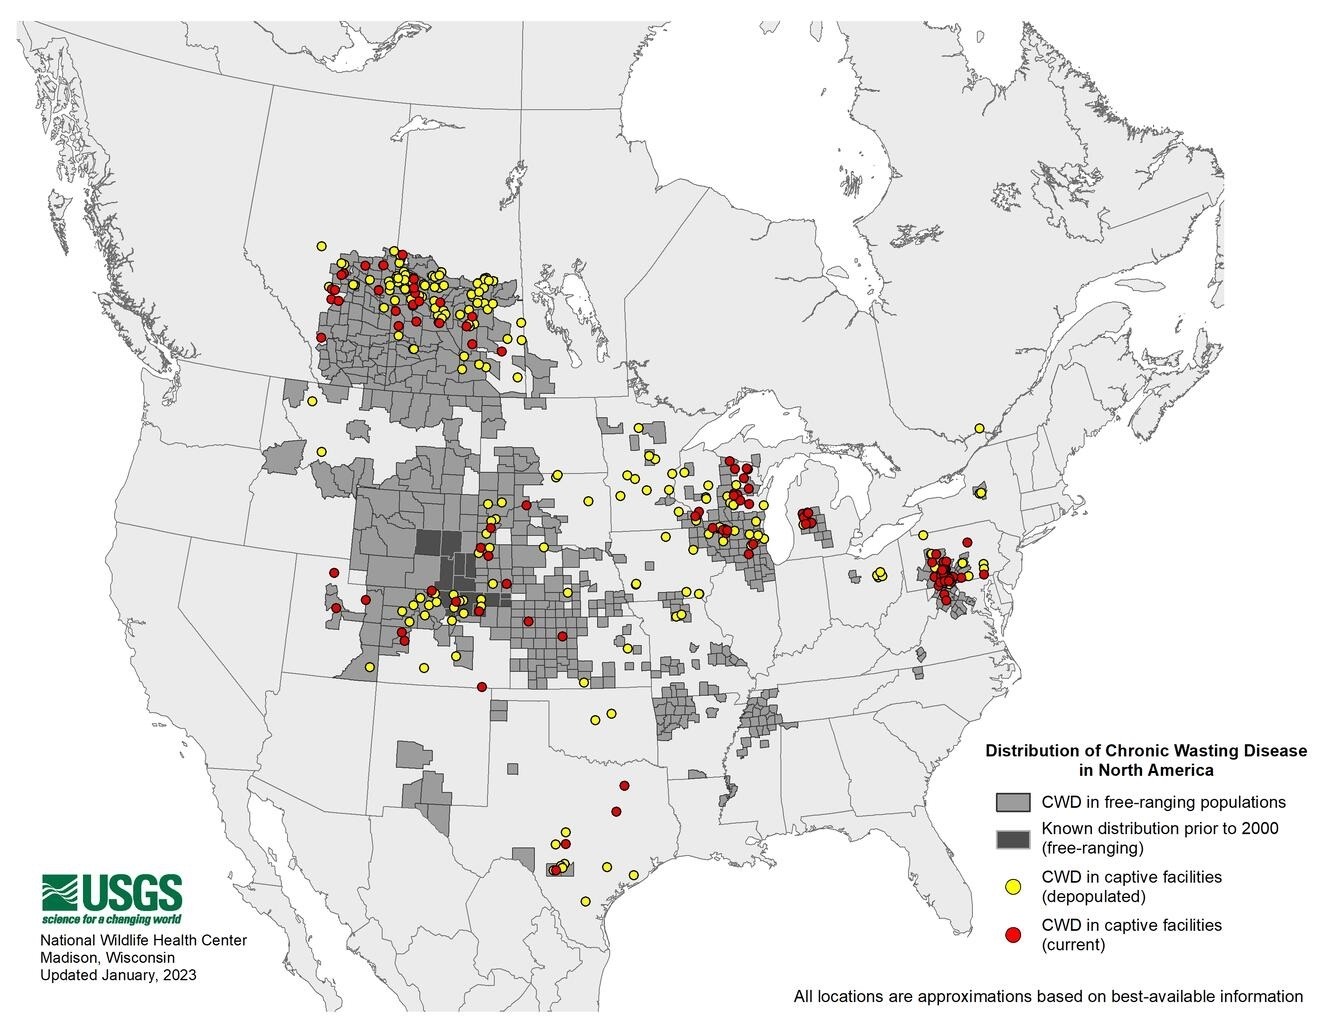 This map assembled by the USGS shows the current reach of CWD in both wild and captive cervid herds. The origin of the disease dates to the 1960s when researchers in Colorado were studying sickened mule deer at a captive facility near Fort Collins. Some of those animals escaped. 